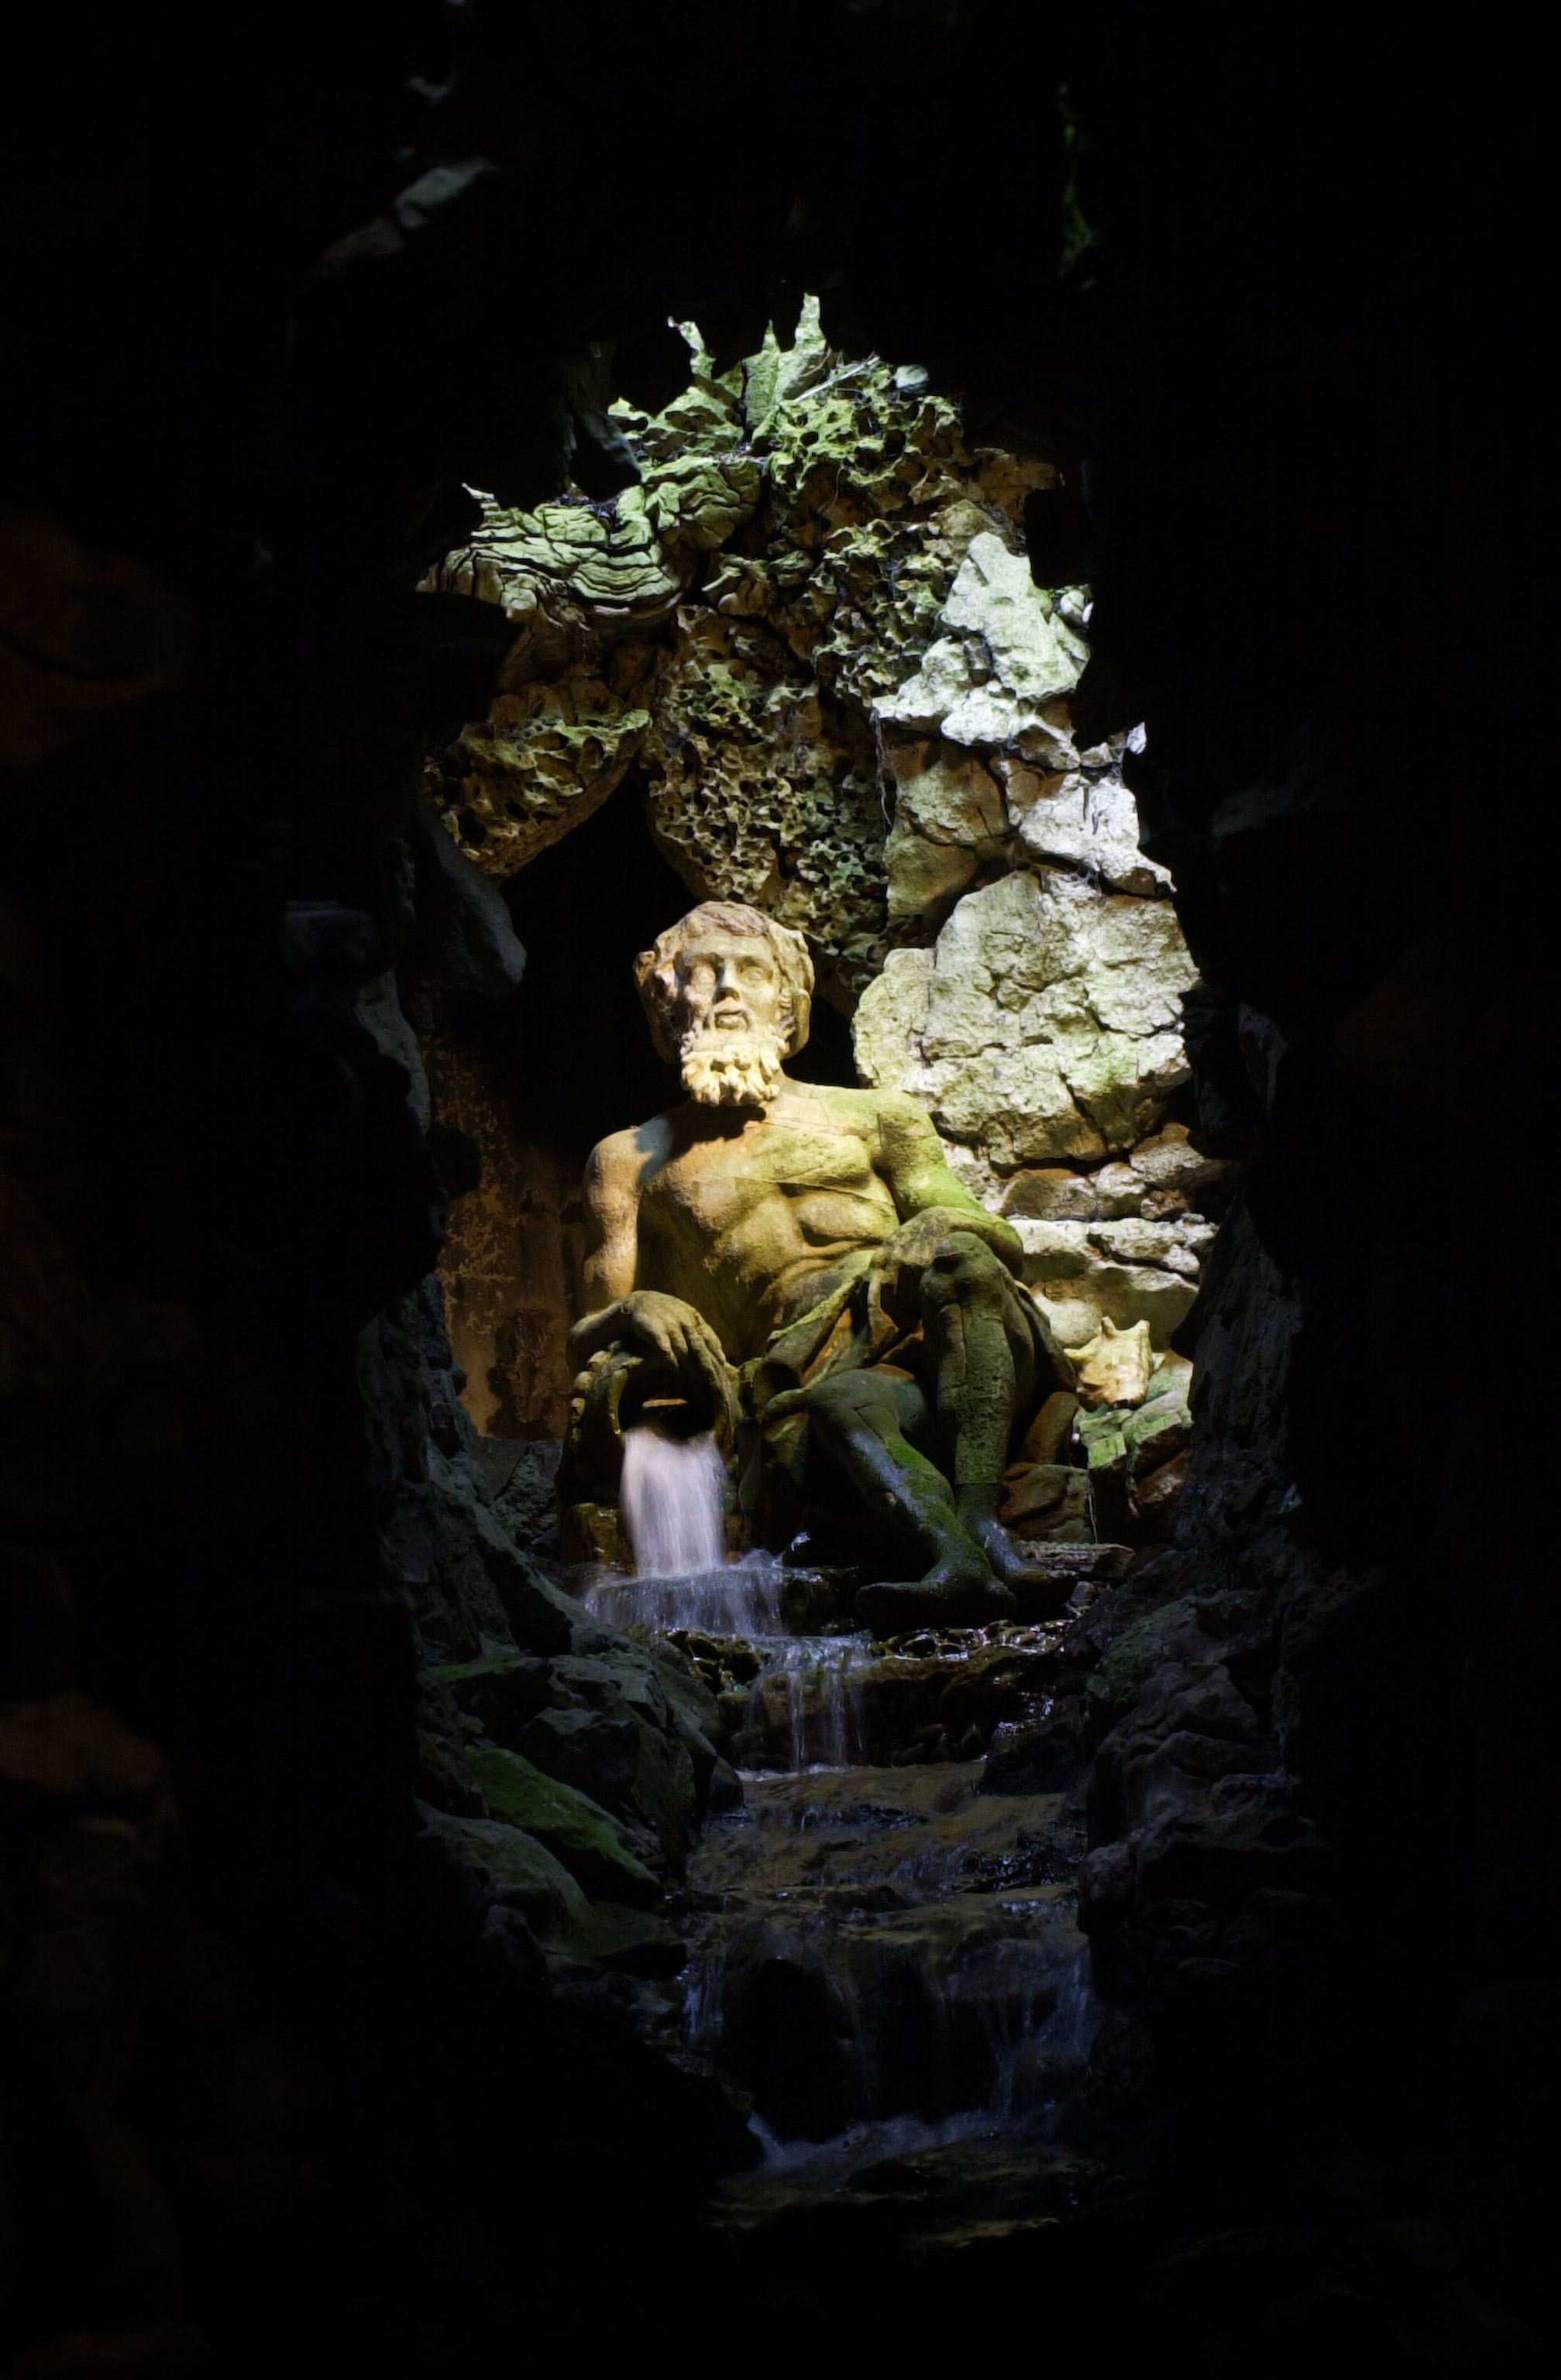 A River God can be found overlooking the grotto's shell room